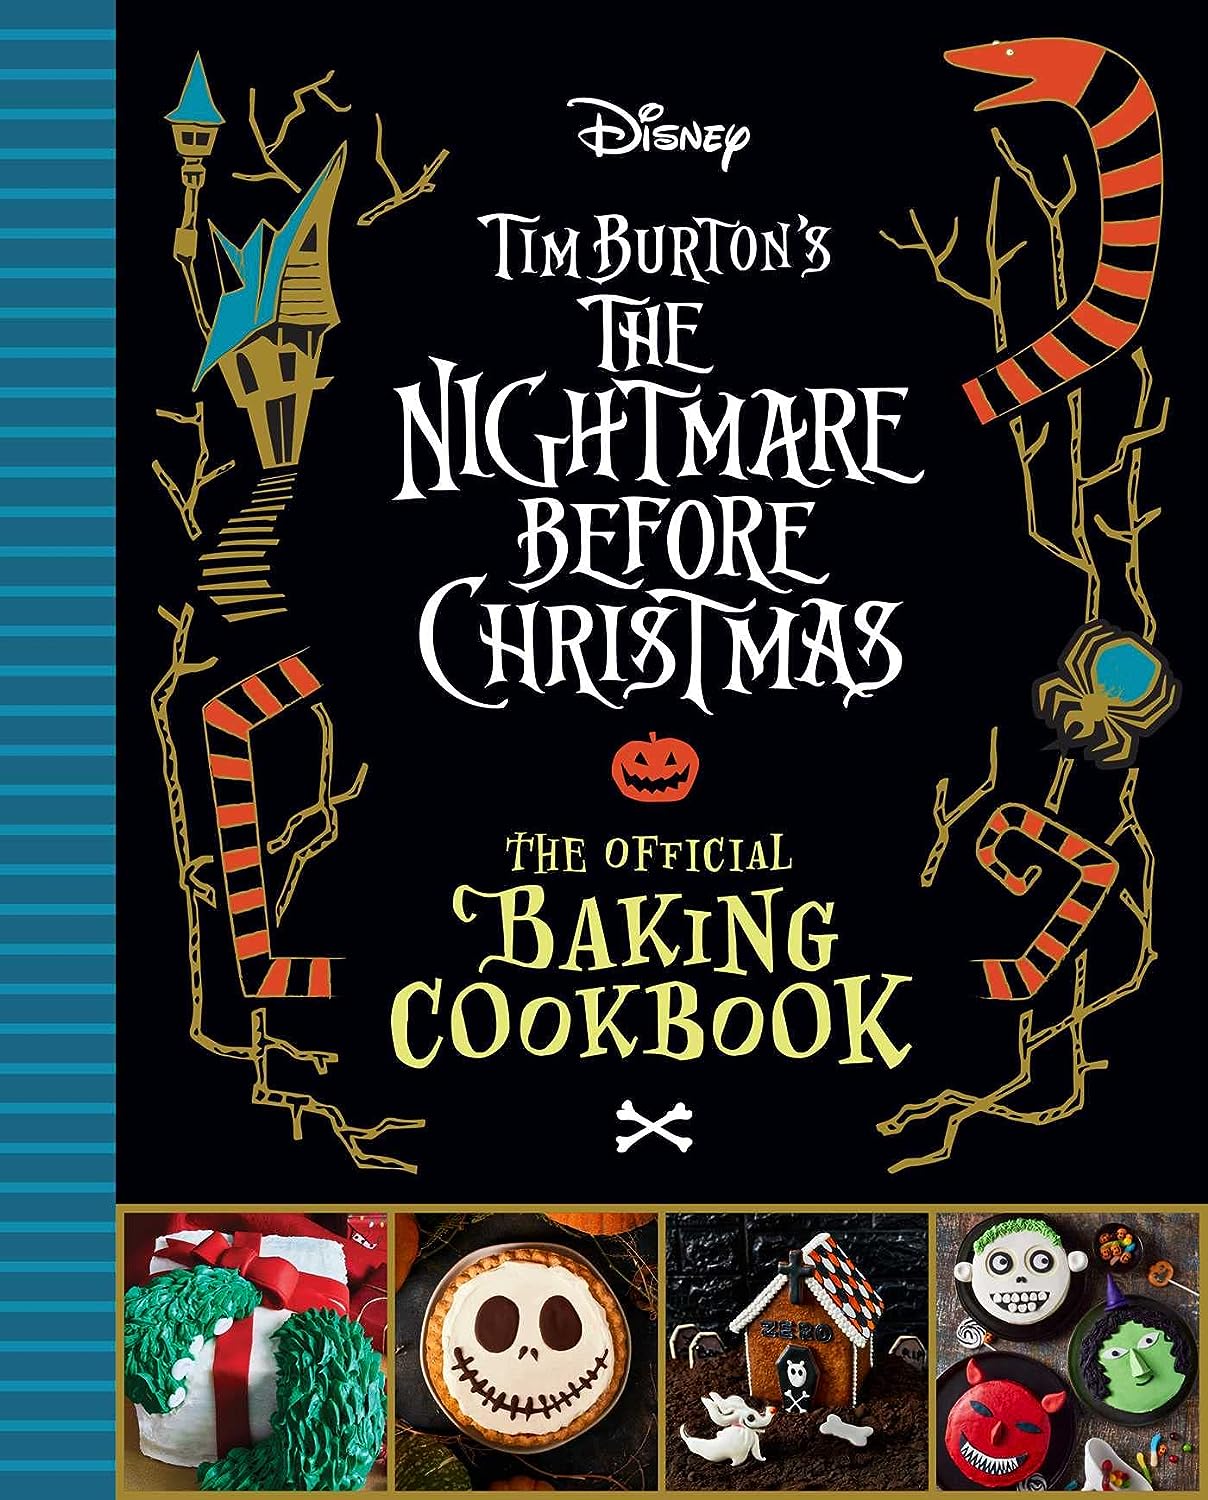 THE NIGHTMARE BEFORE CHRISTMAS OFFICIAL BAKING COOKBOOK - SNUGLY, S. - HARDCOVER